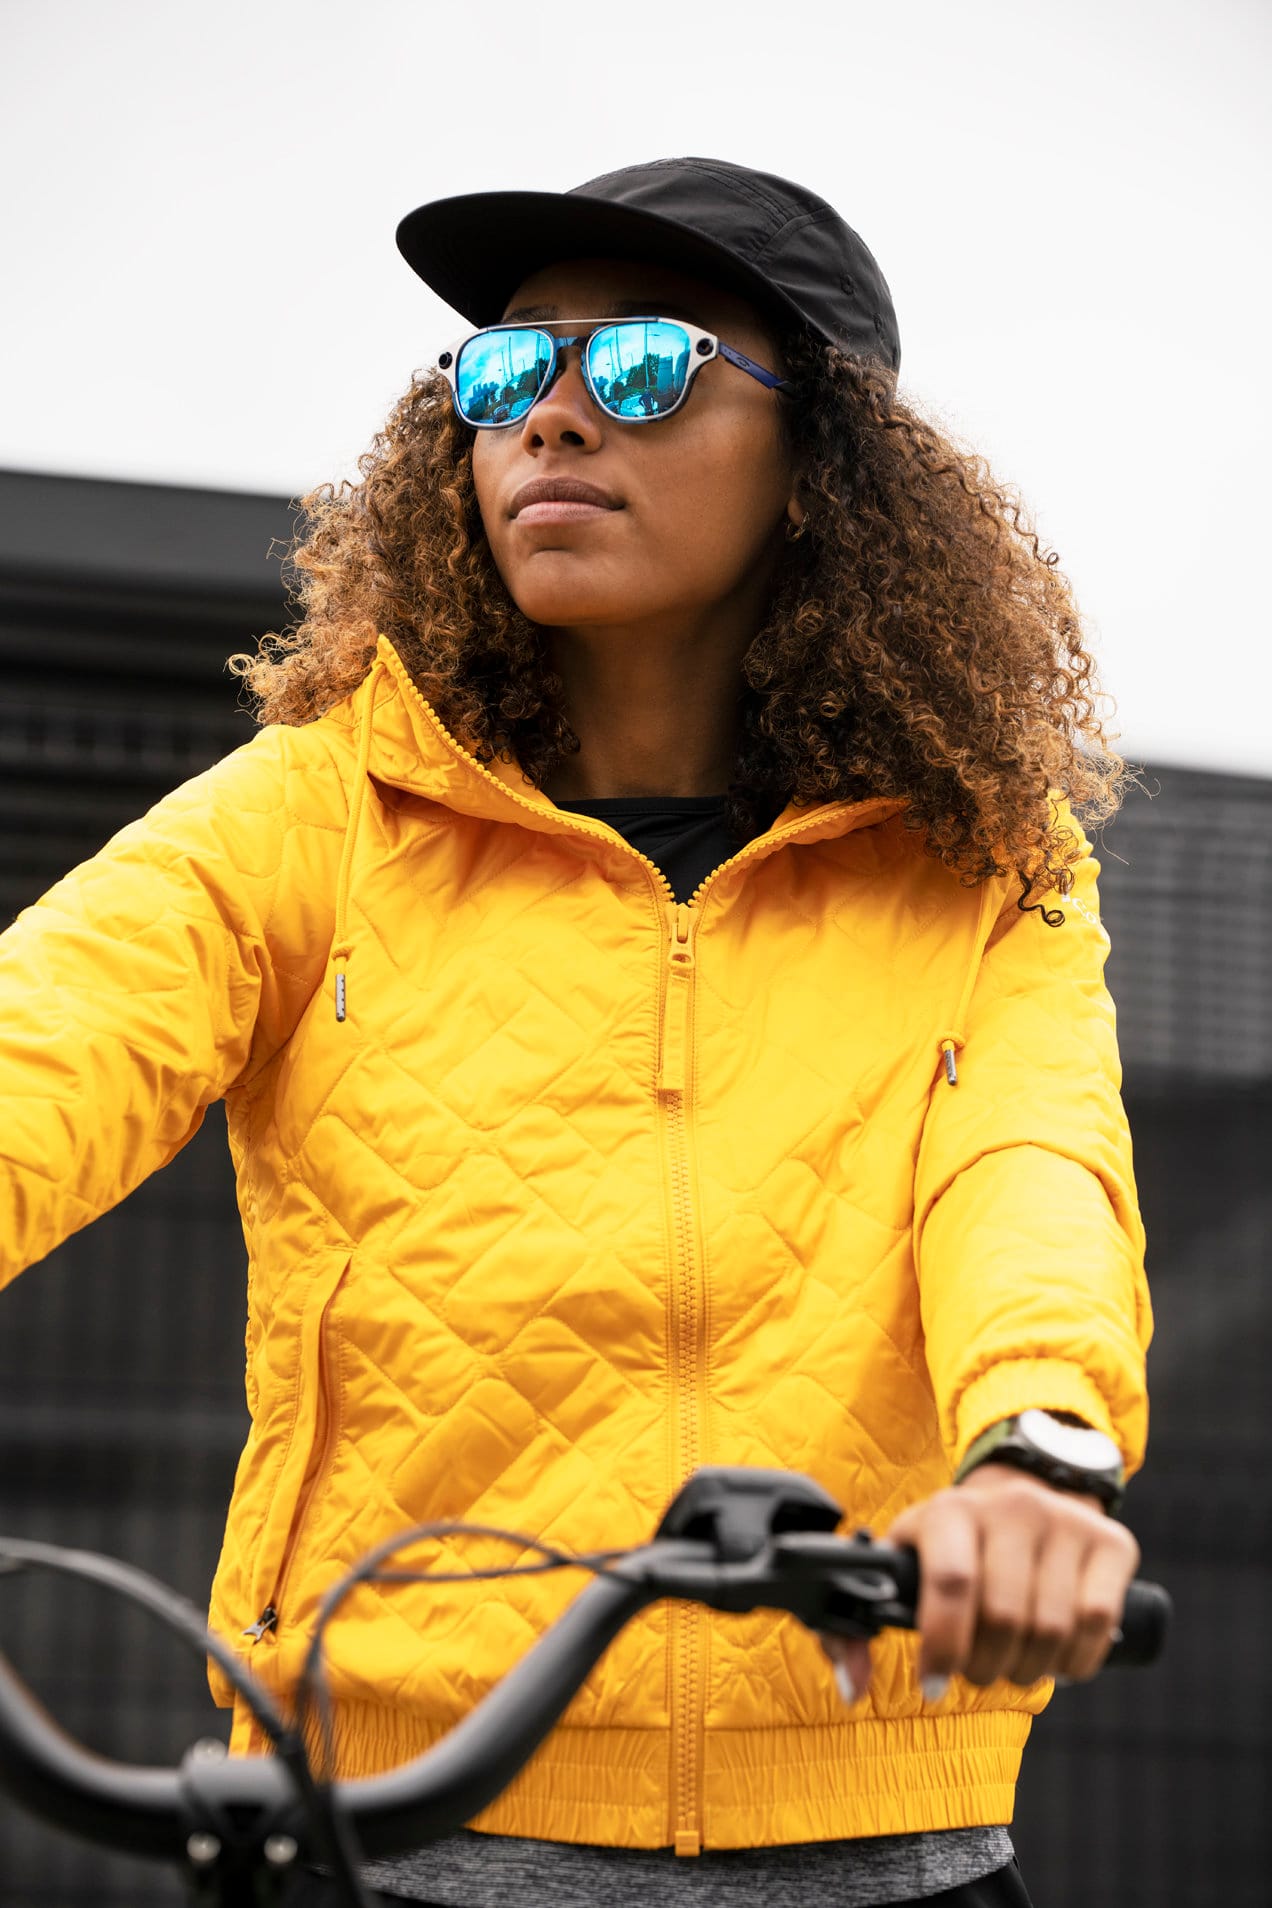 Essential clothes commuting for ebike by